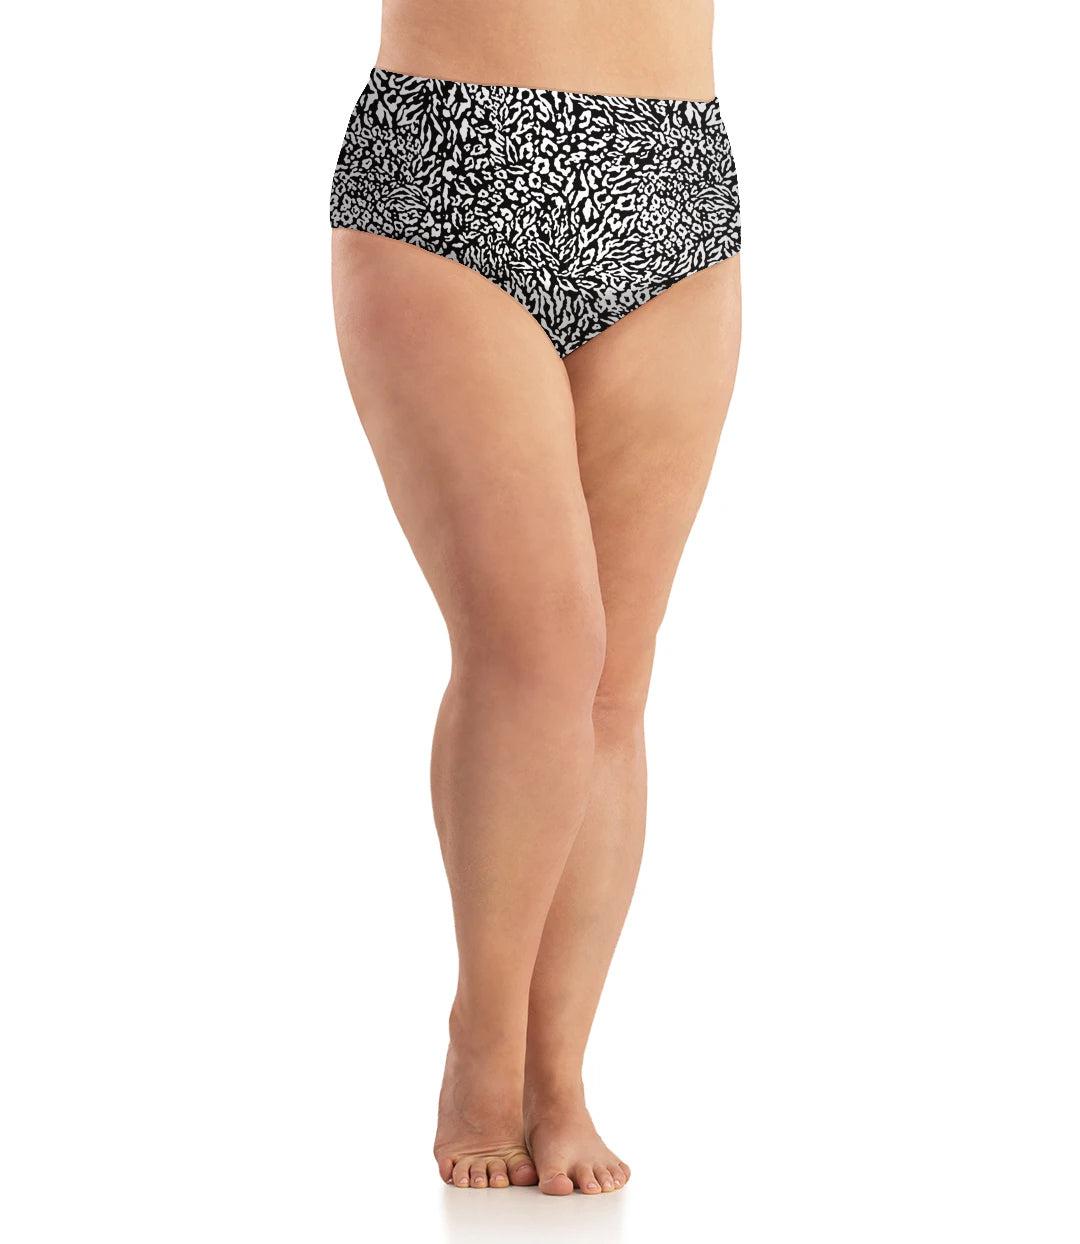 Bottom half of plus sized woman, facing front, wearing JunoActive Junowear Cotton Stretch Classic Brief in wild print. This brief fits to the waistline with conservative leg opening. Wild print is a black print with white animal spots.